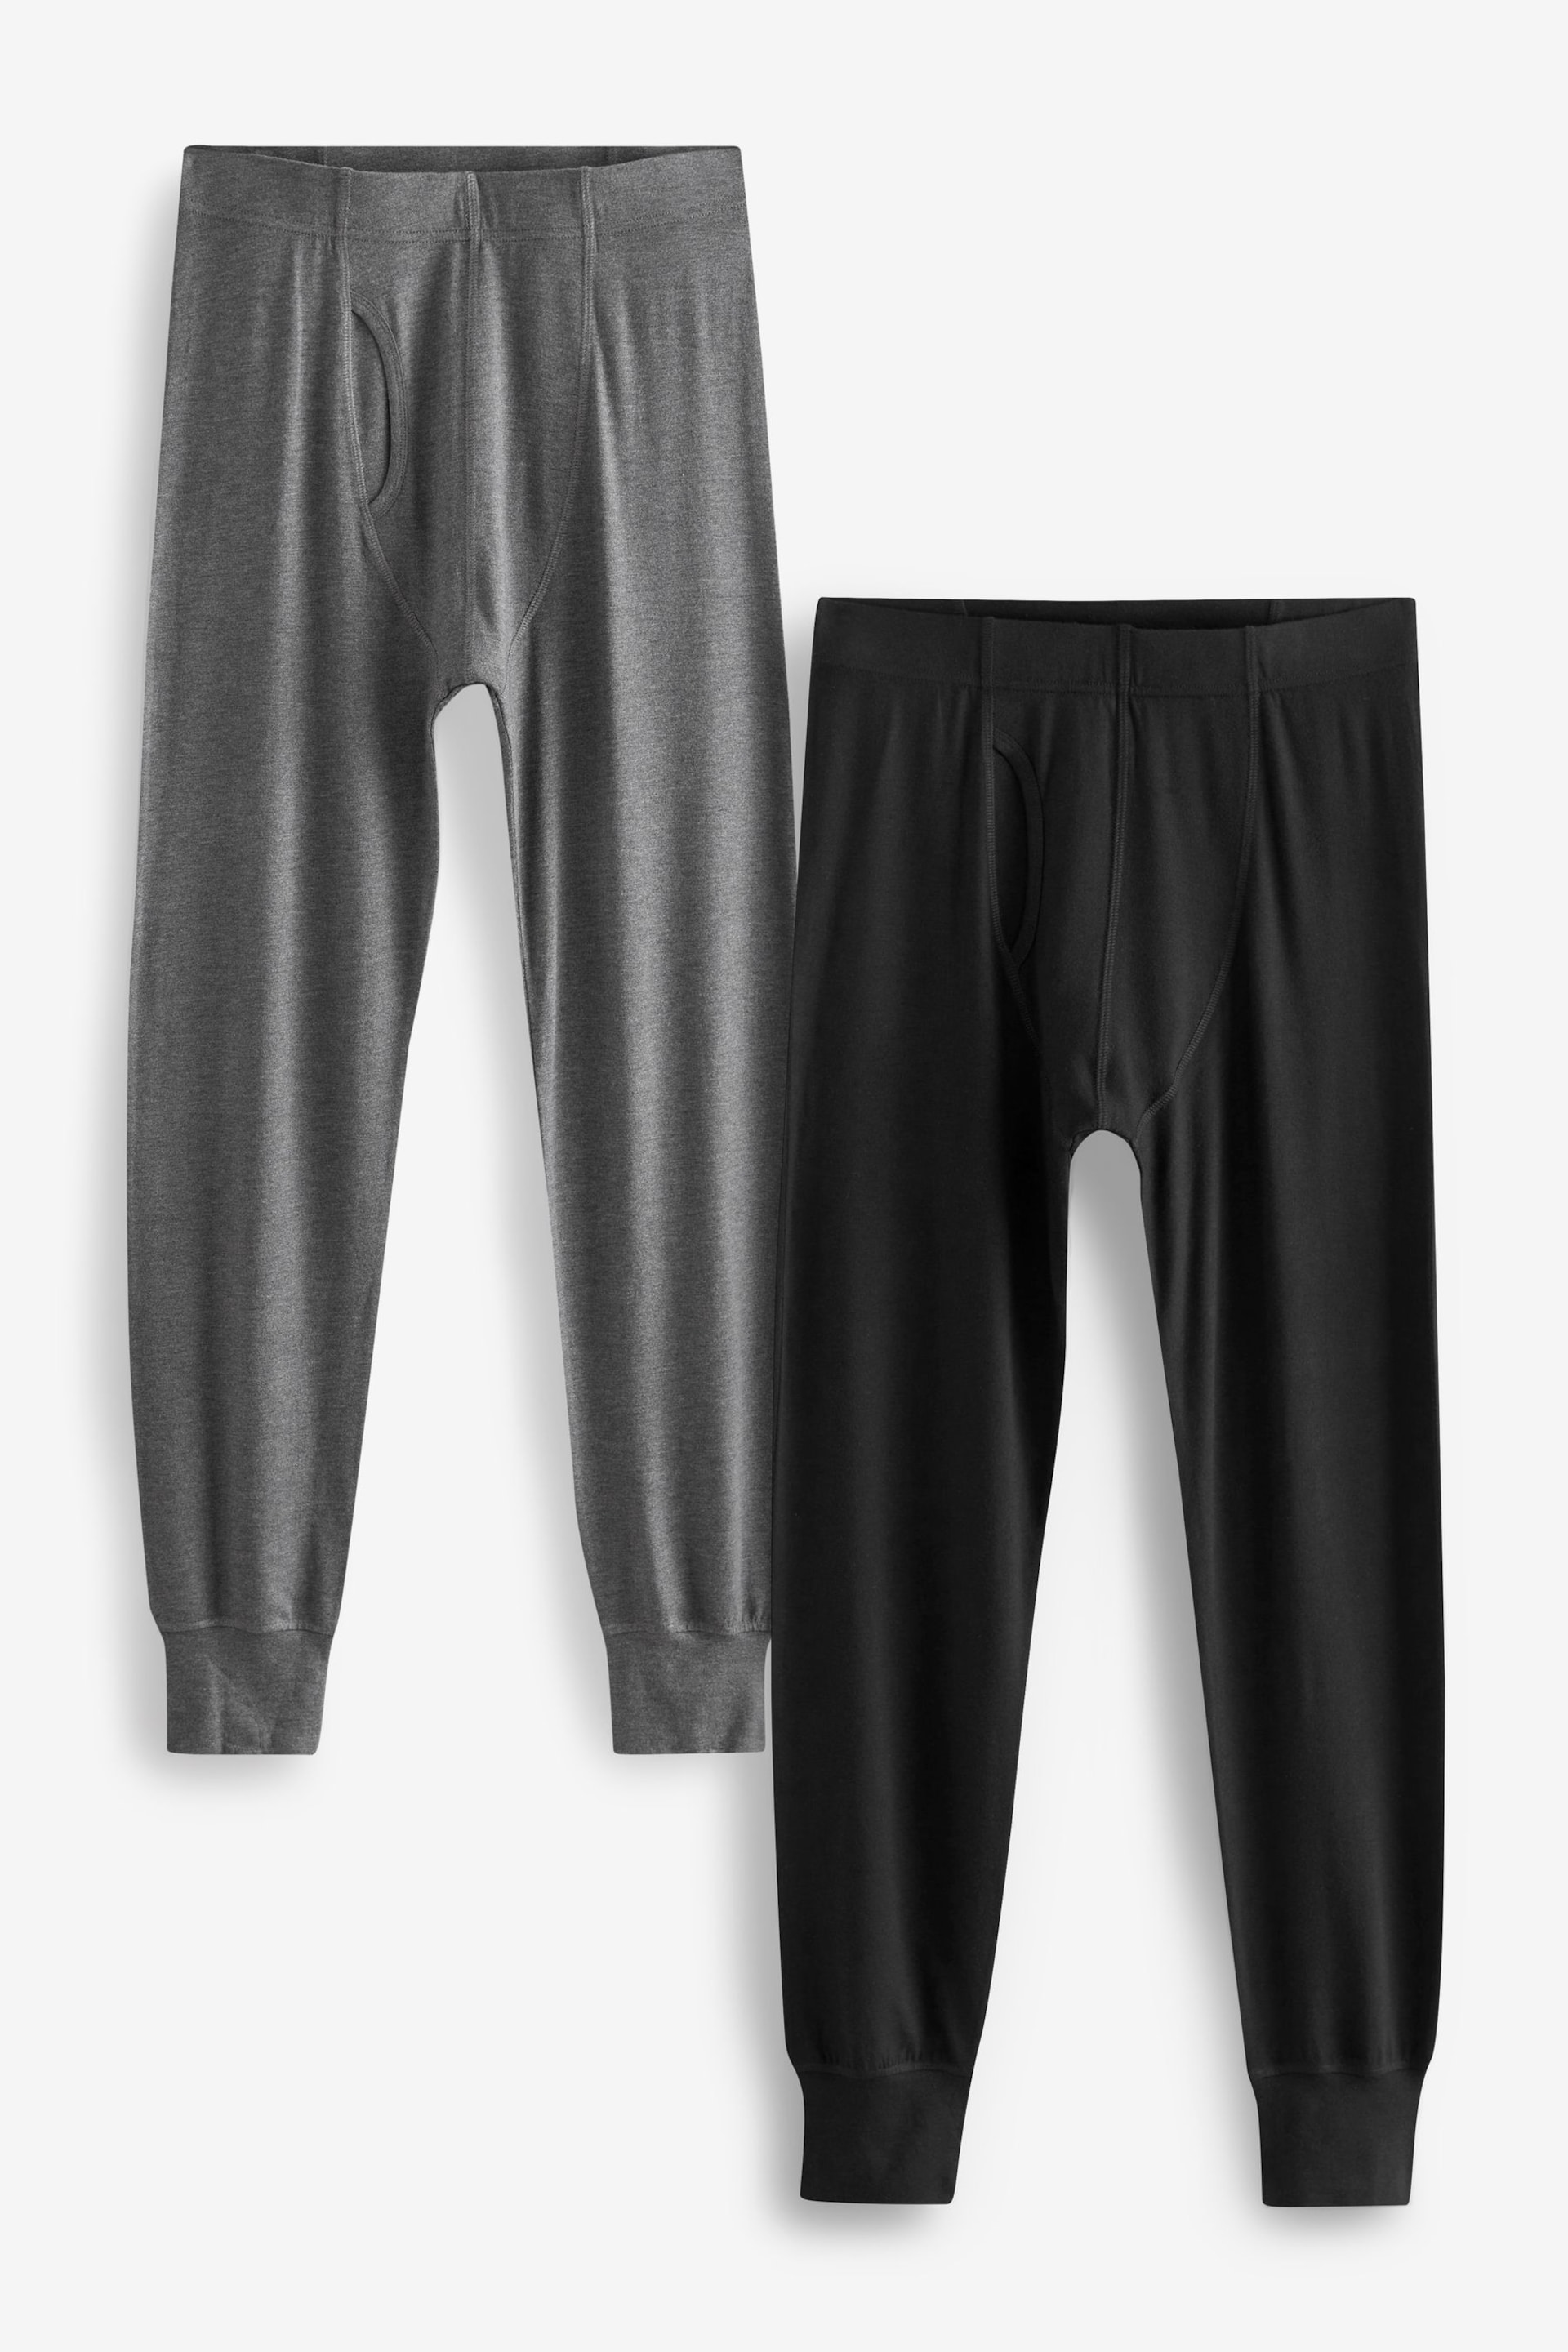 Black/Grey 2 Pack Lightweight Thermal Long Johns - Image 6 of 10